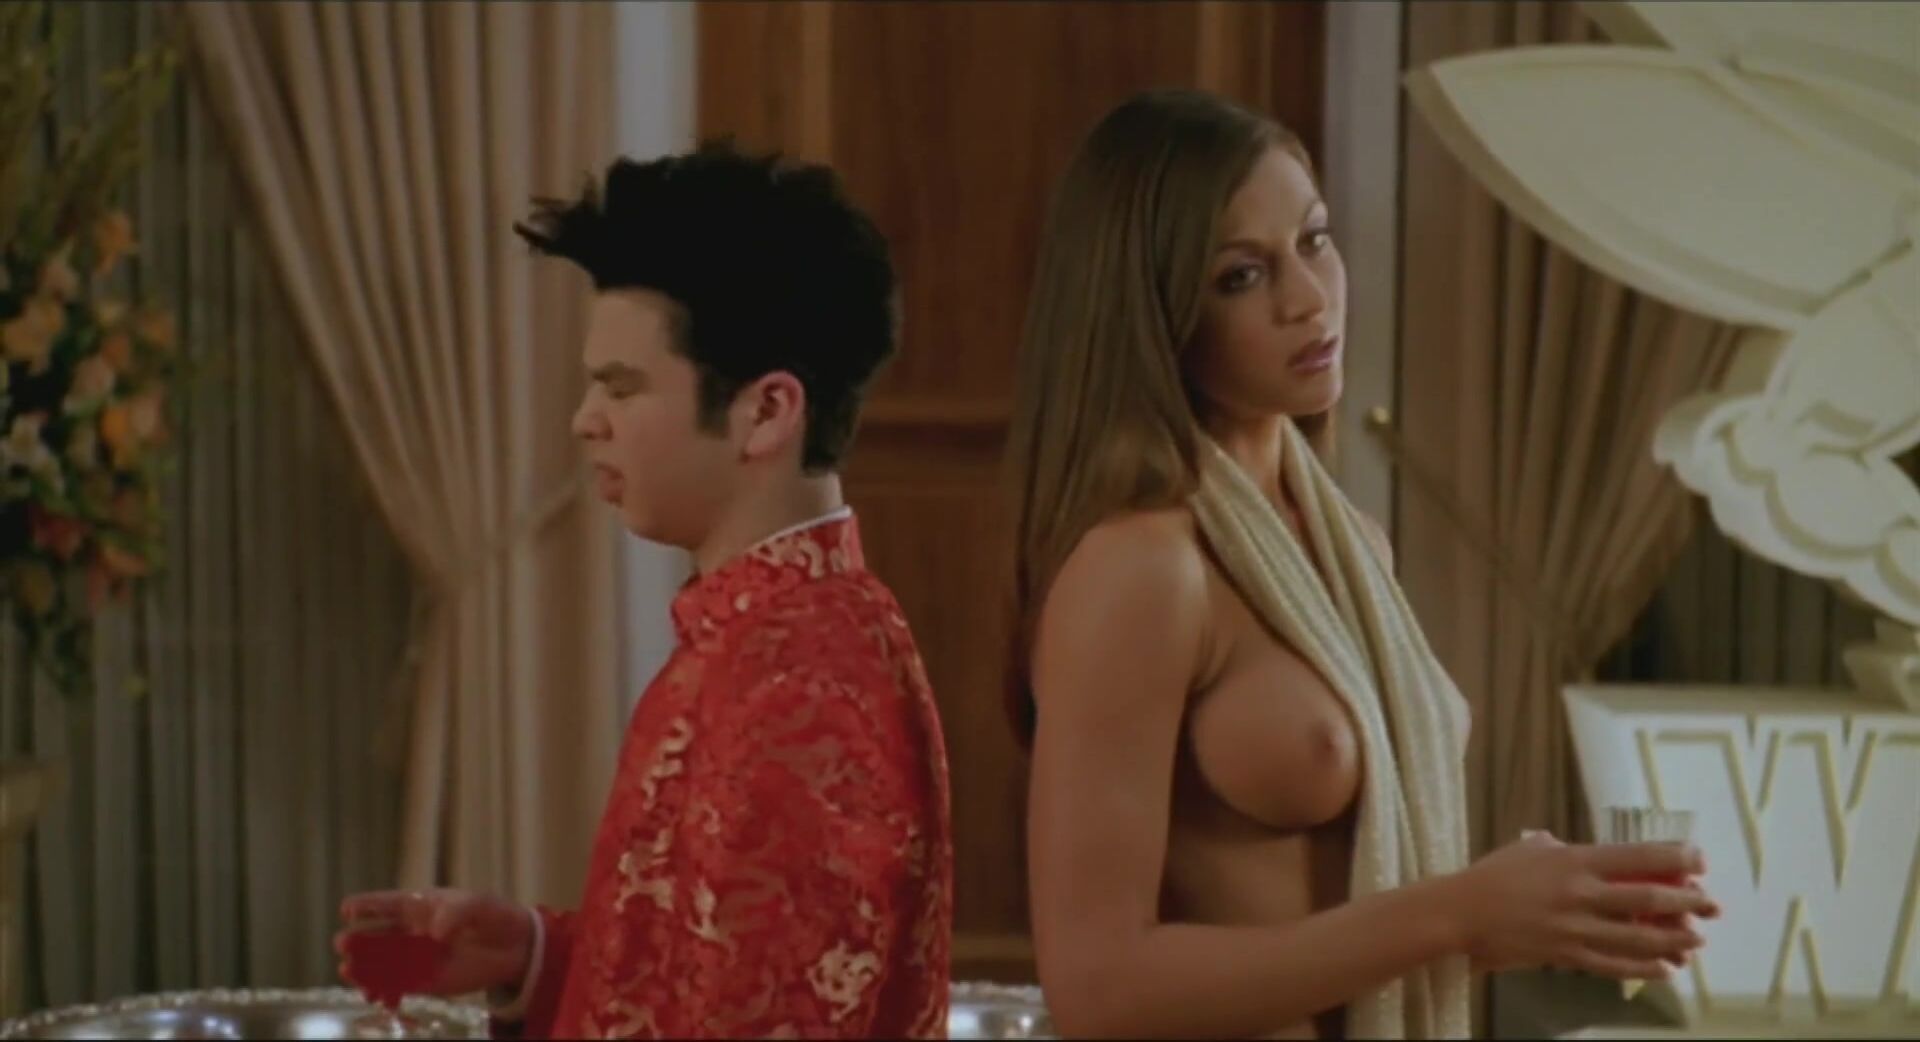 Hot Girl Fuck Slender Cerina Vincent dislikes wearing clothes in Not Another Teen Movie (2001) Girl Sucking Dick